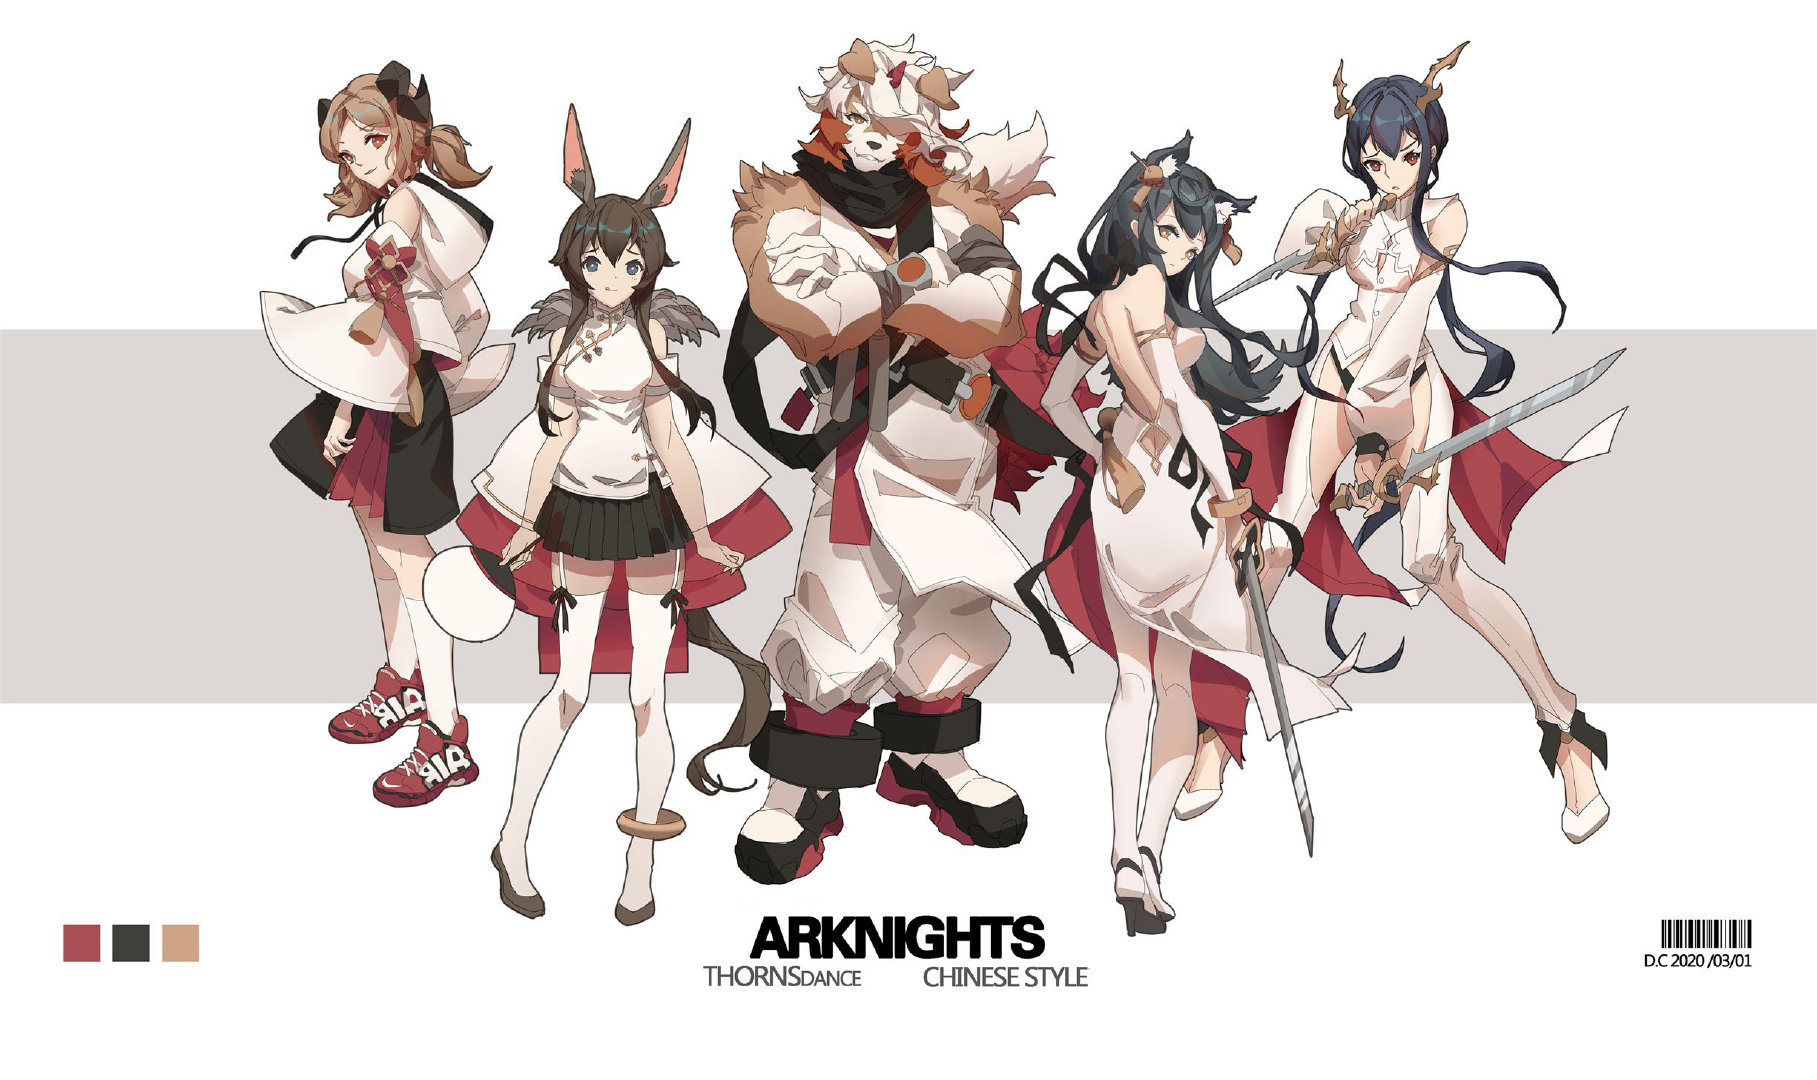 T5 Arknights Amiya Arknights Chen Arknights Chinese Clothing Ifrit Arknights 1817x1080